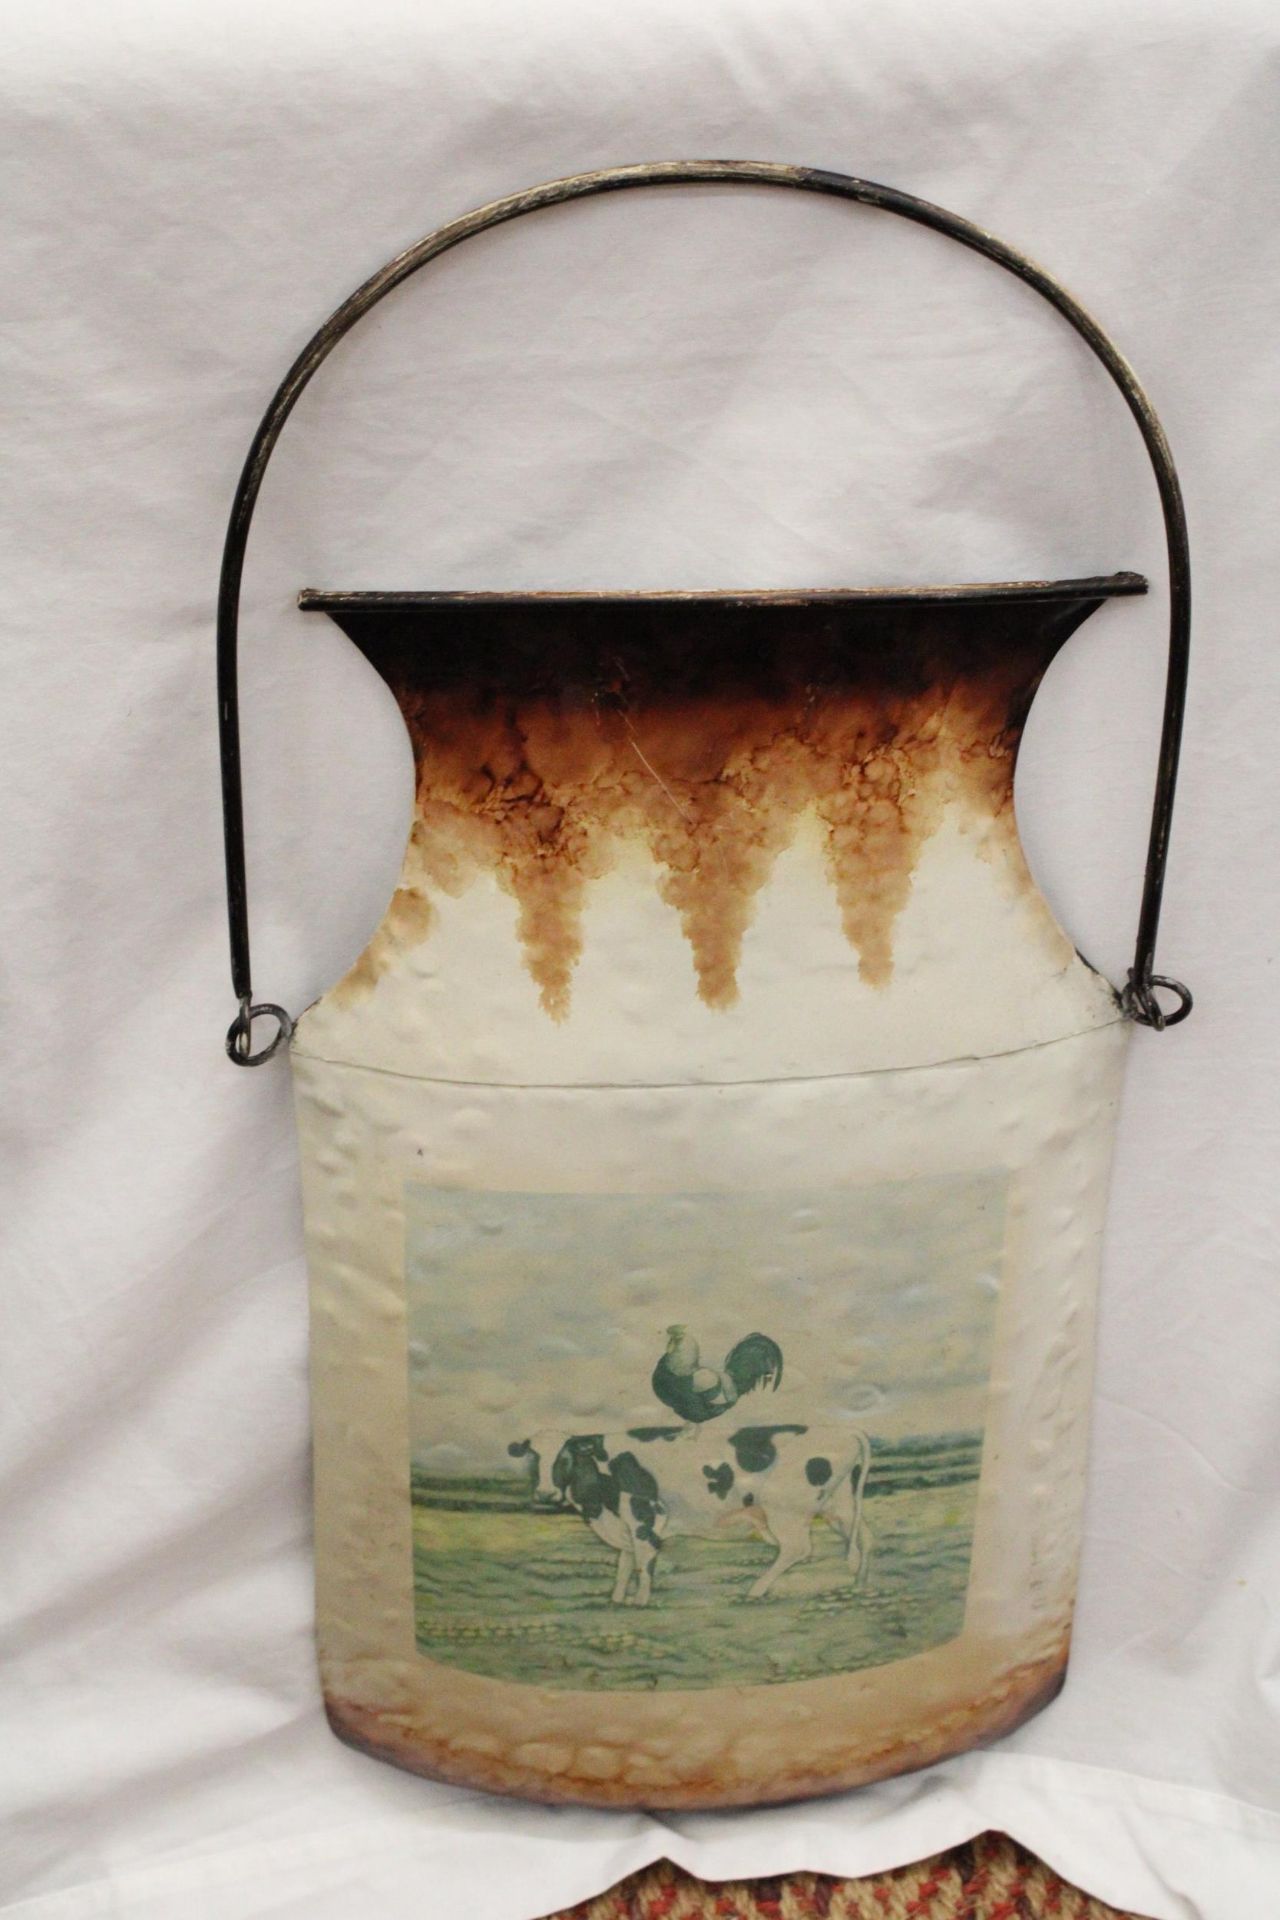 A METAL WALL HANGING CHURN, WITH THE IMAGE OF A ROOSTER ON A COW, 28CM X 53CM - Image 3 of 4